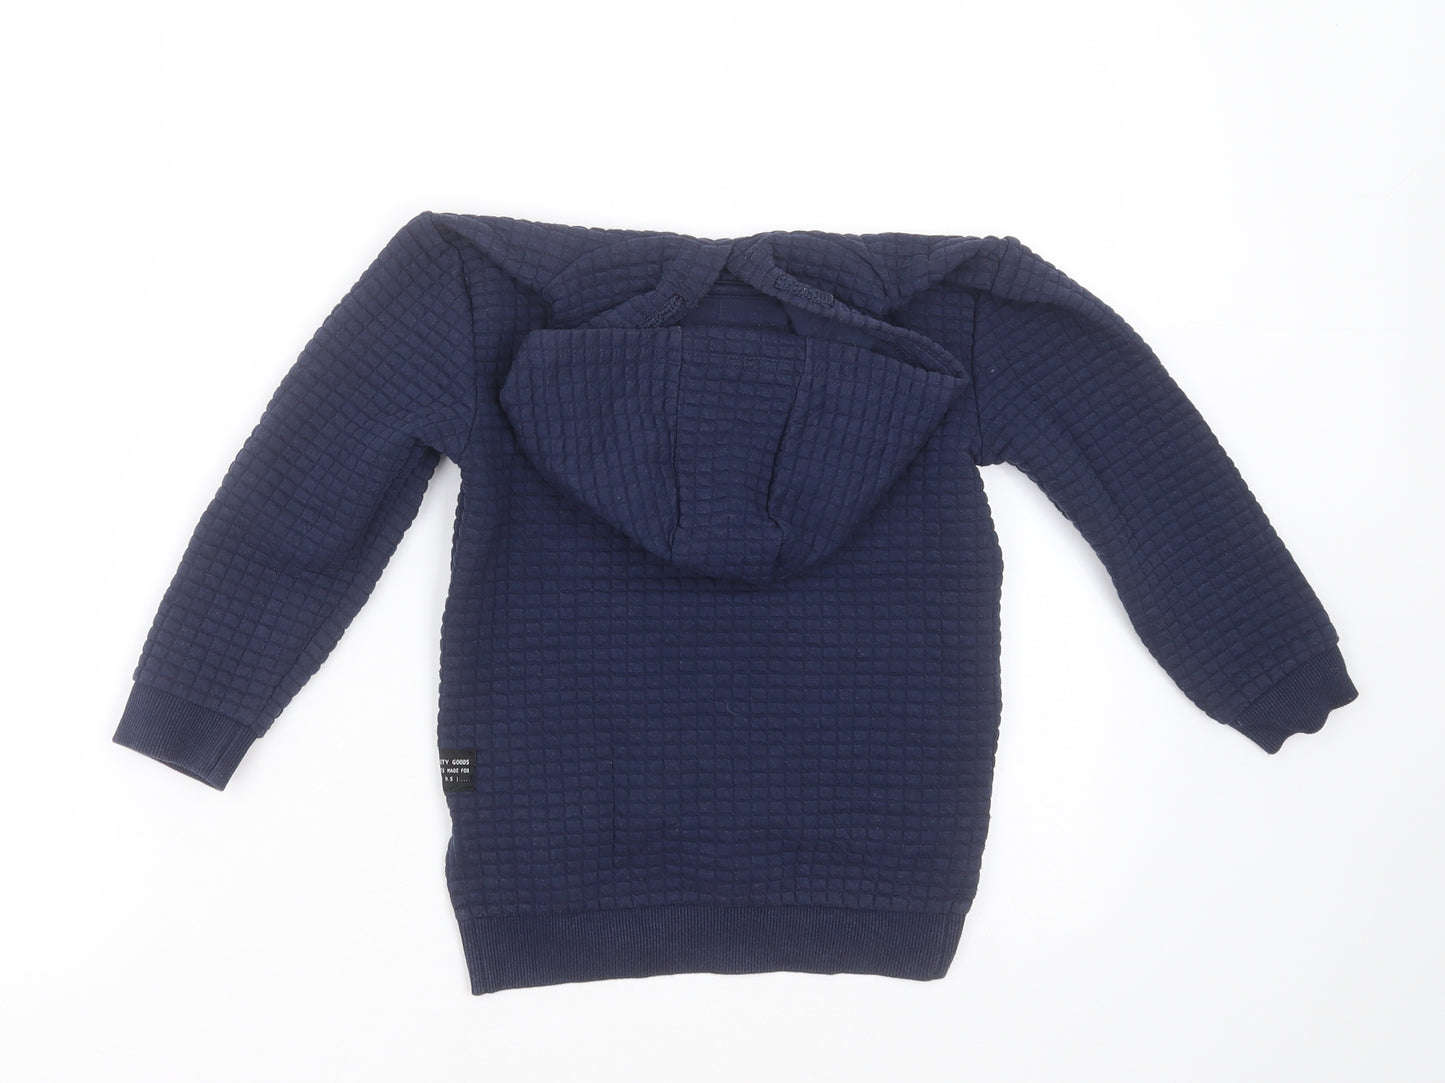 Primark Boys Blue Check Polyester Pullover Hoodie Size 5-6 Years